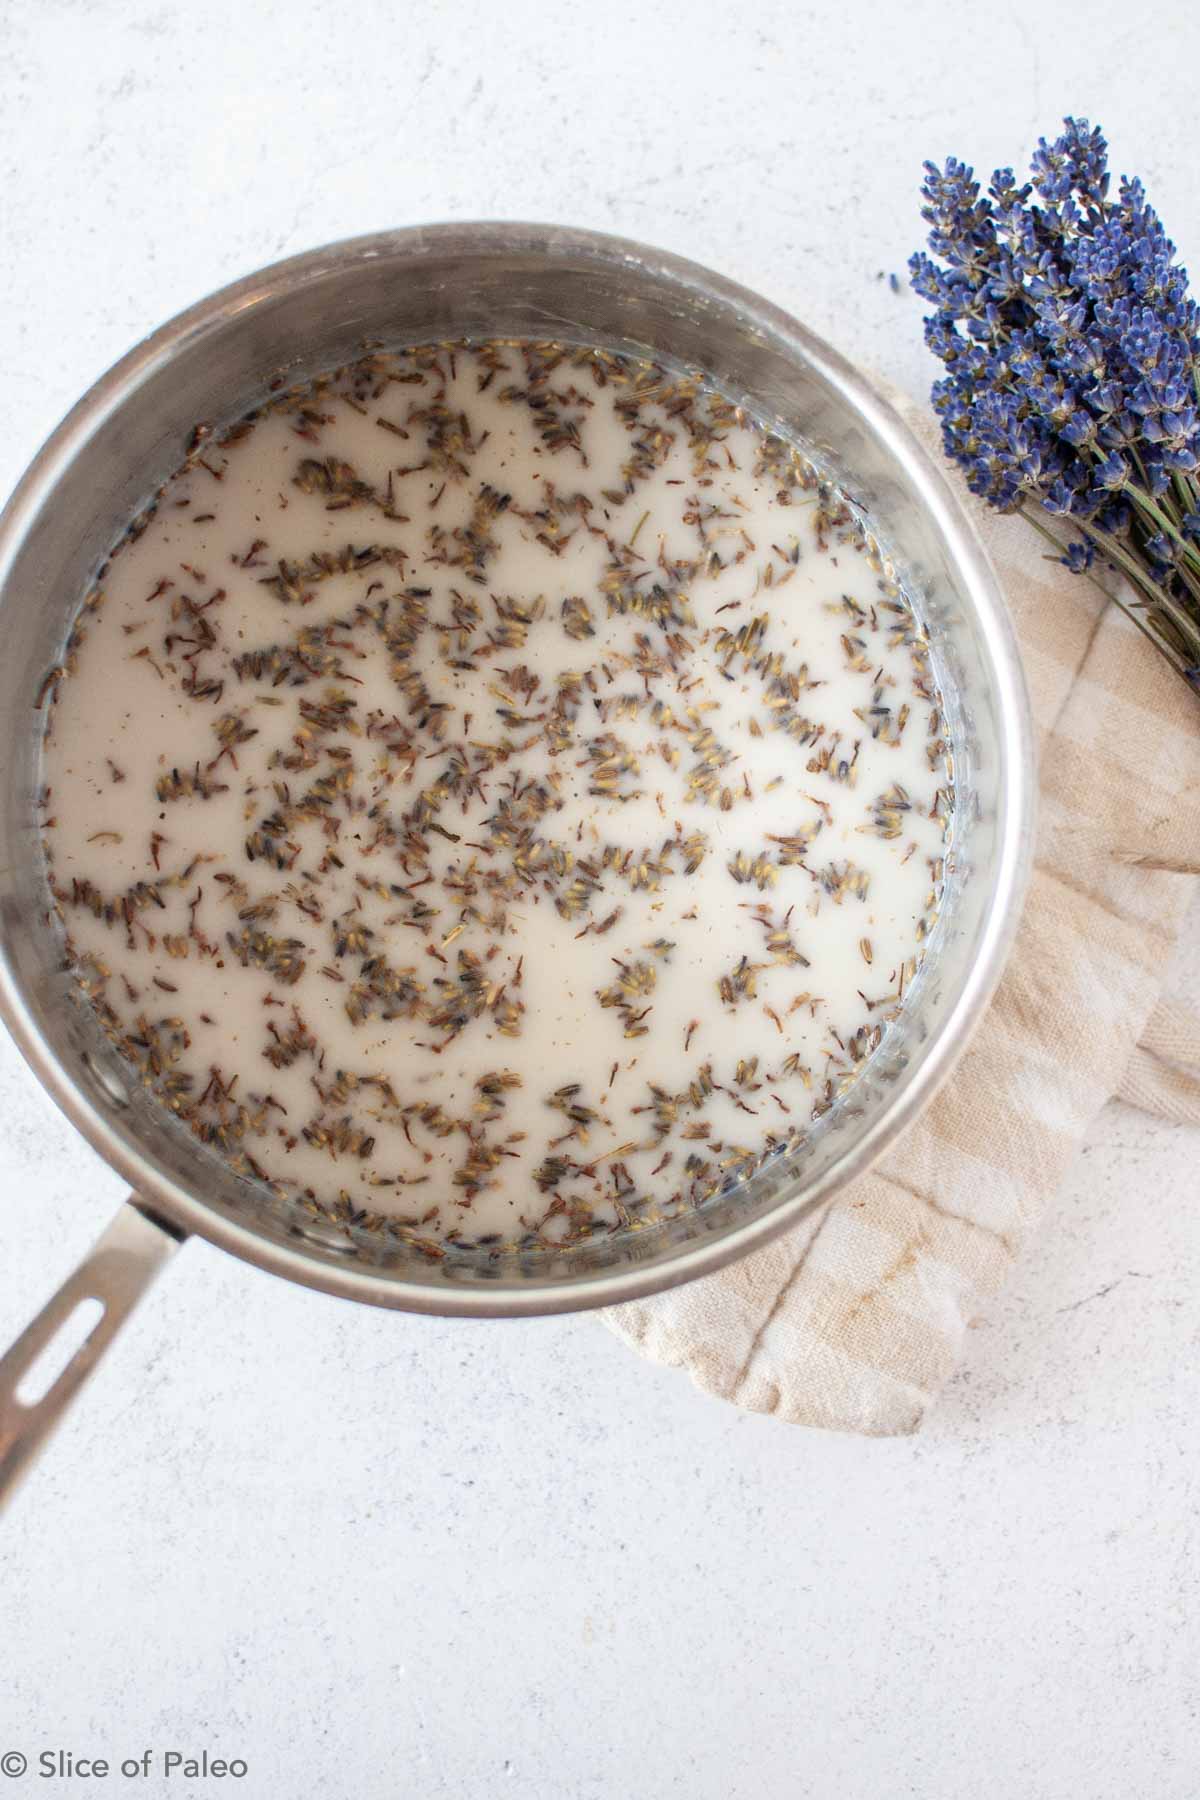 Paleo Lavender Honey Ice Cream cooking process with lavender infusing in coconut milk